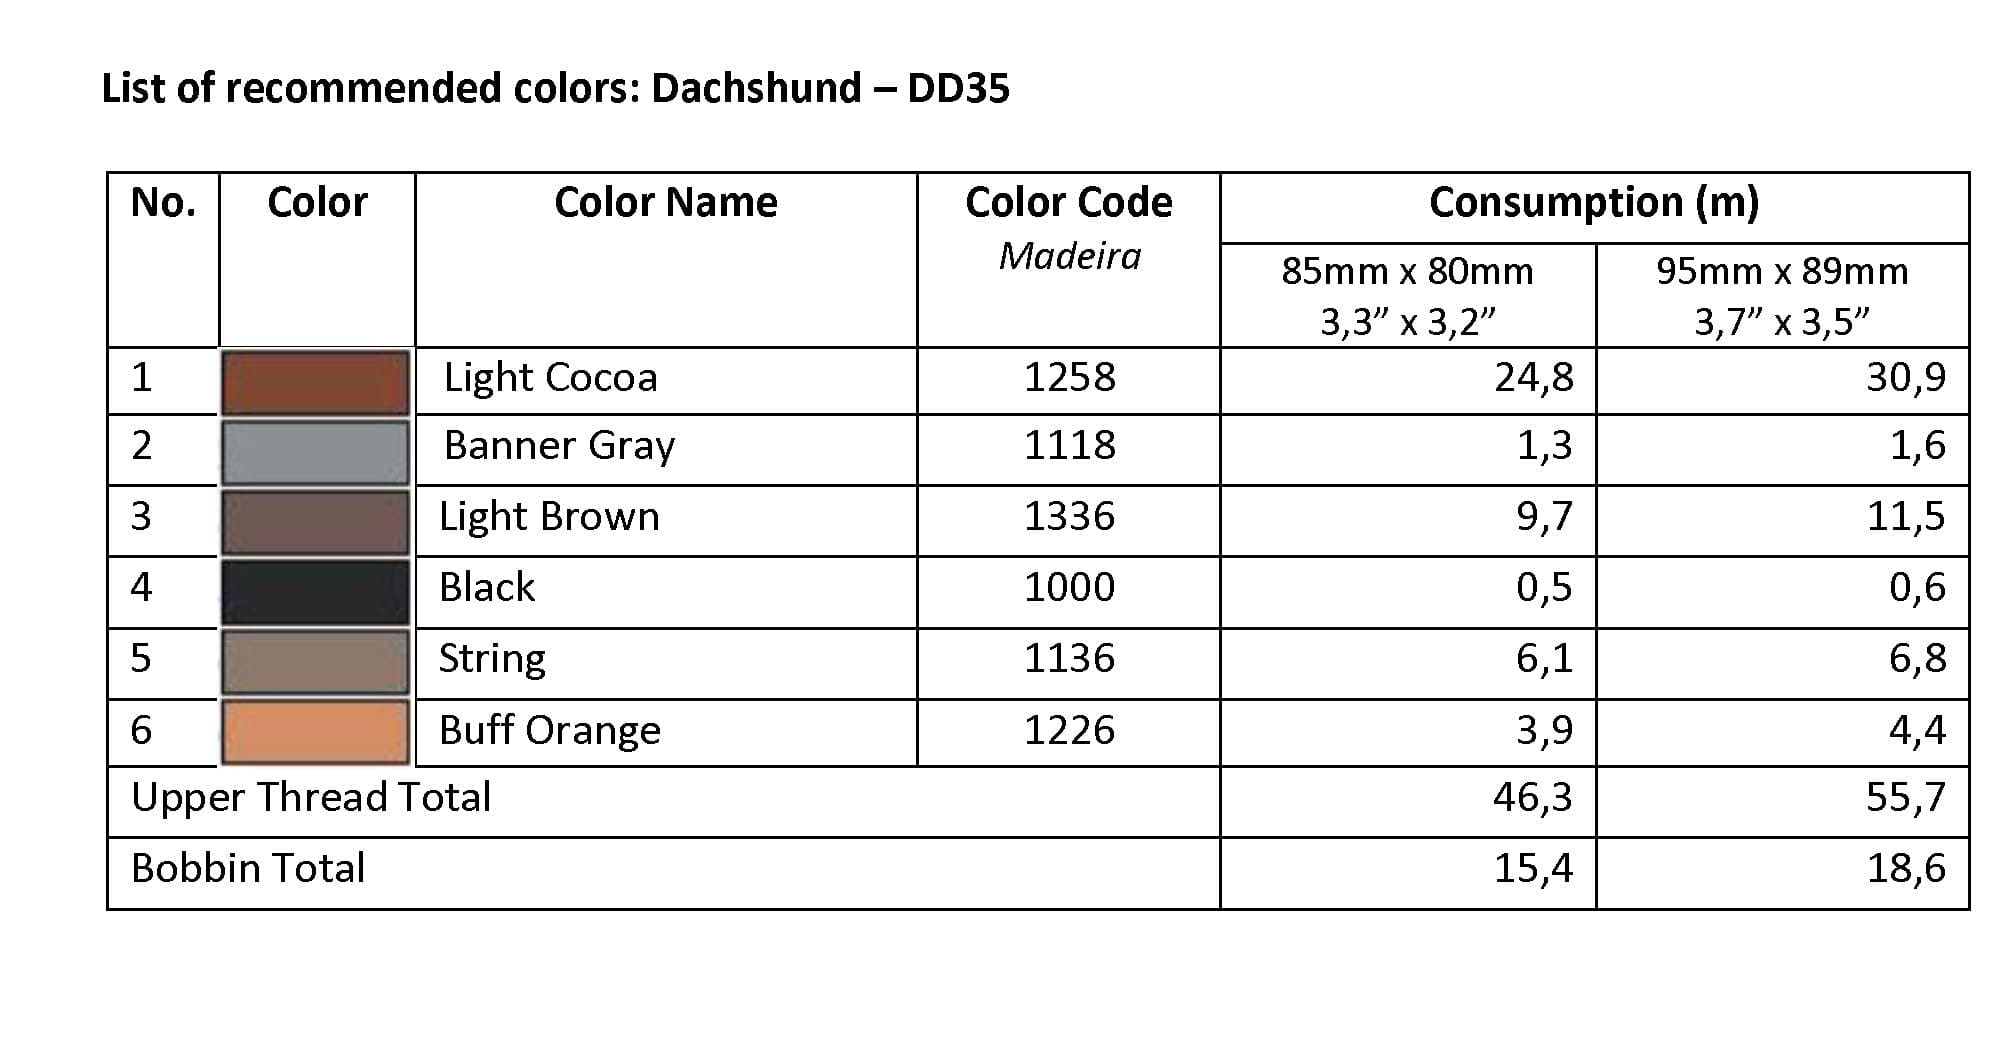 List of Recommended Colors - Dachshund DD35